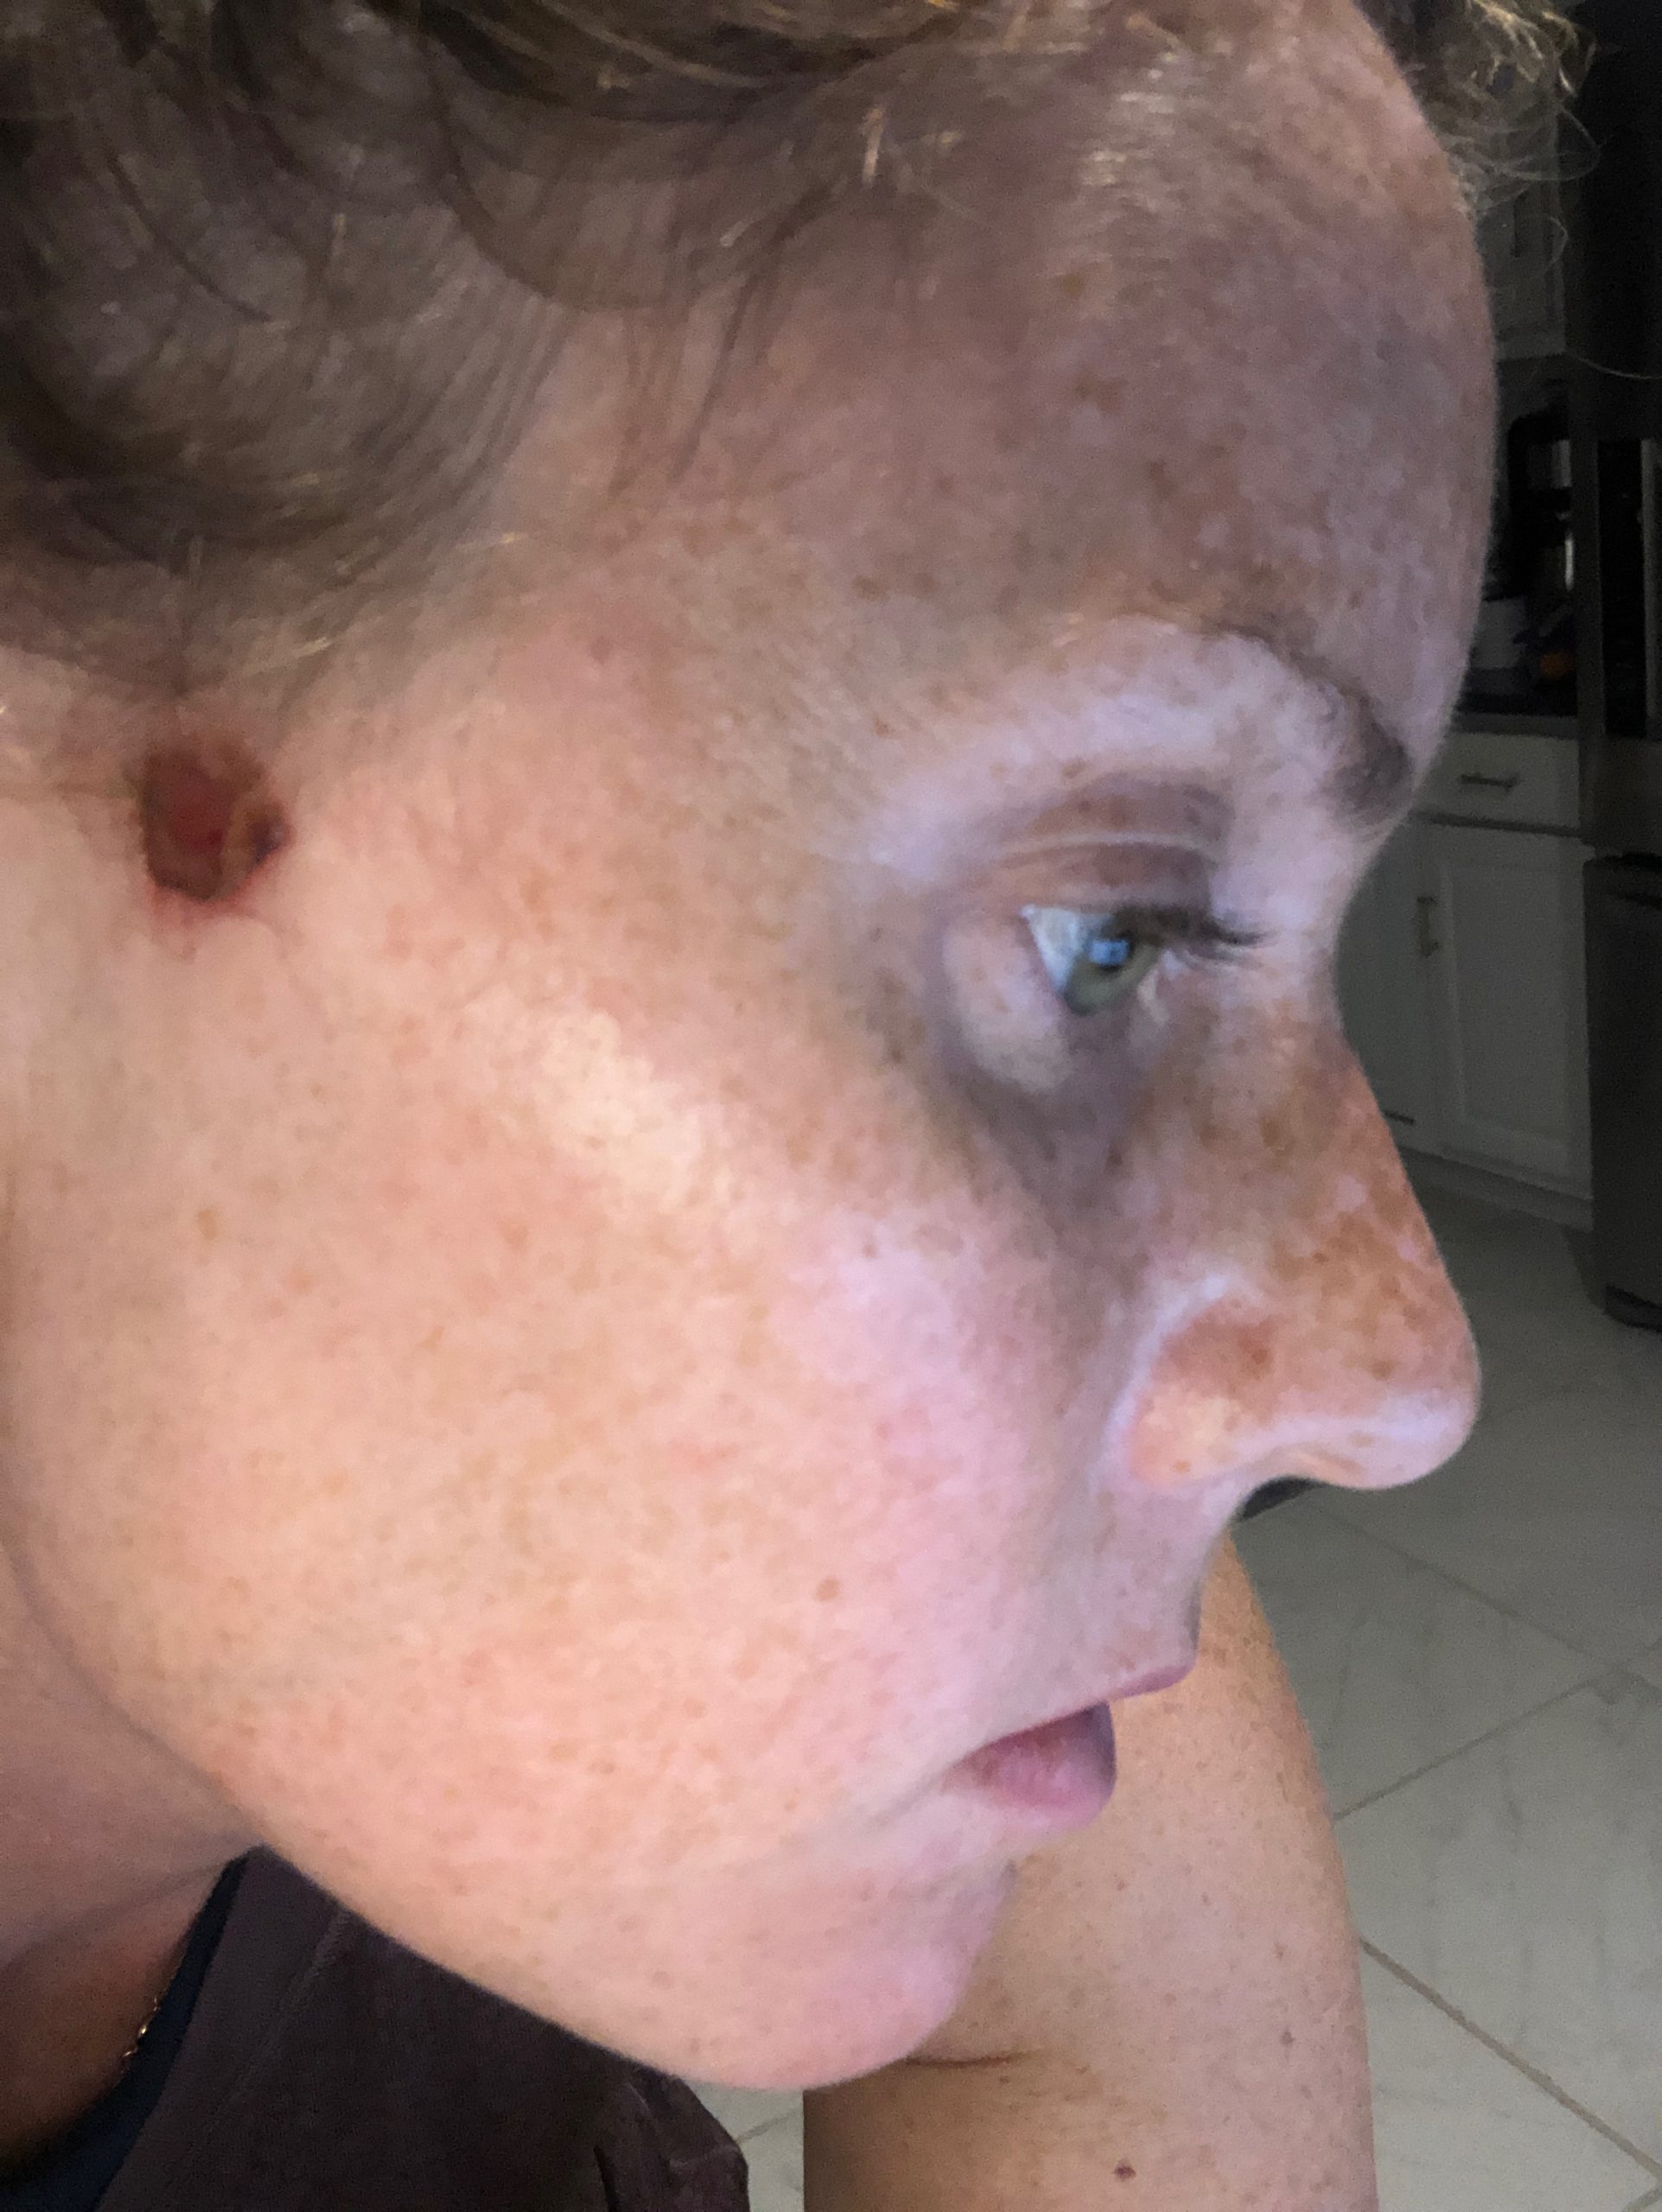 Woman with Basal Cell Carcinoma Skin Cancer on face